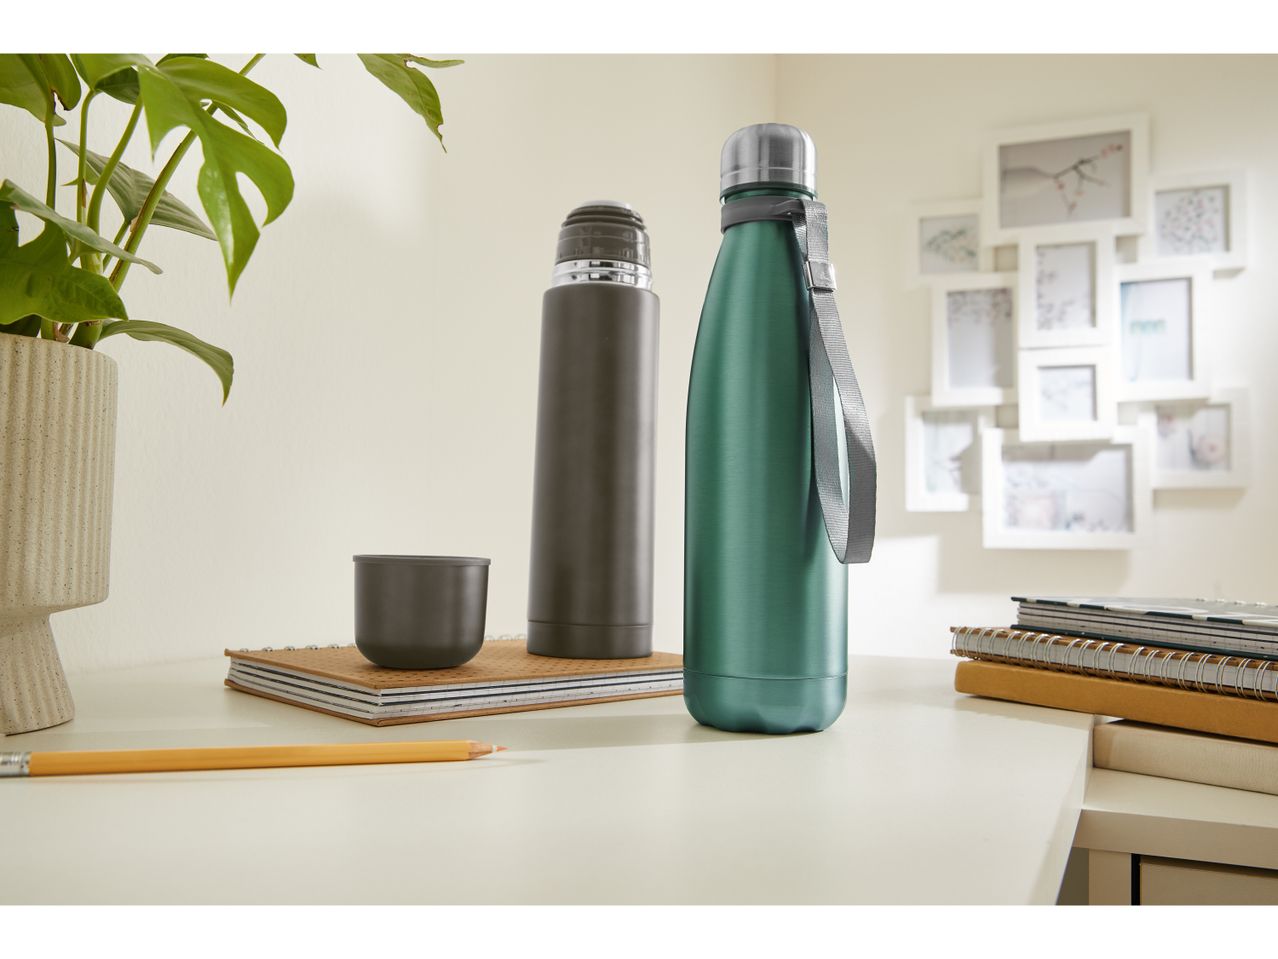 Go to full screen view: Stainless Steel Insulated Flask or Travel Mug - Image 4